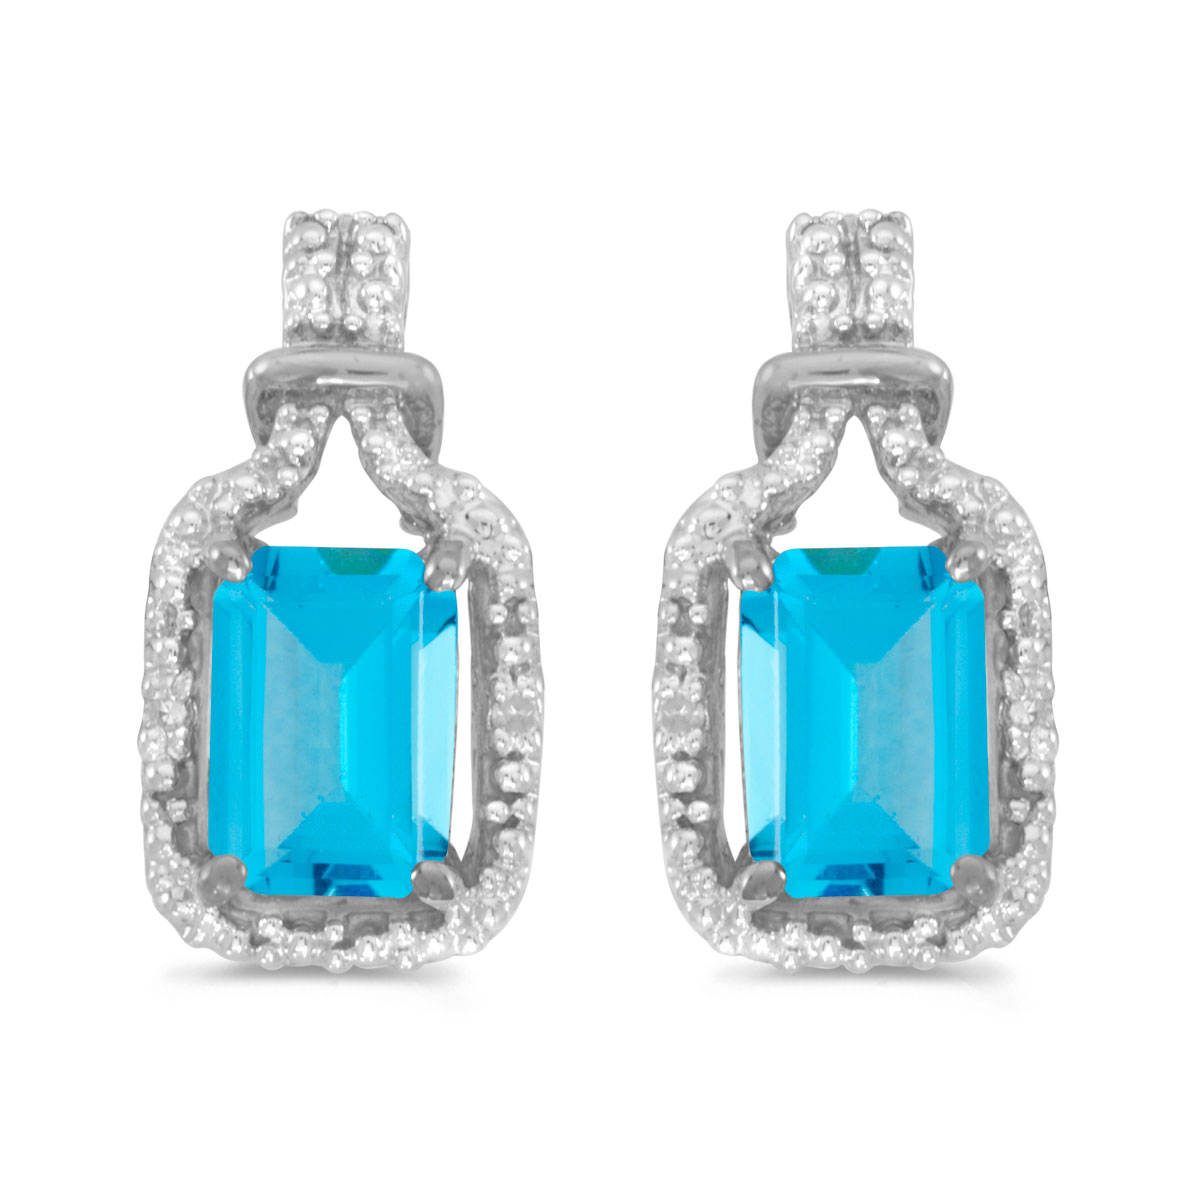 JCX2047: These 14k white gold emerald-cut blue topaz and diamond earrings feature 7x5 mm genuine natural blue topazs with a 2.30 ct total weight and sparkling diamond accents.